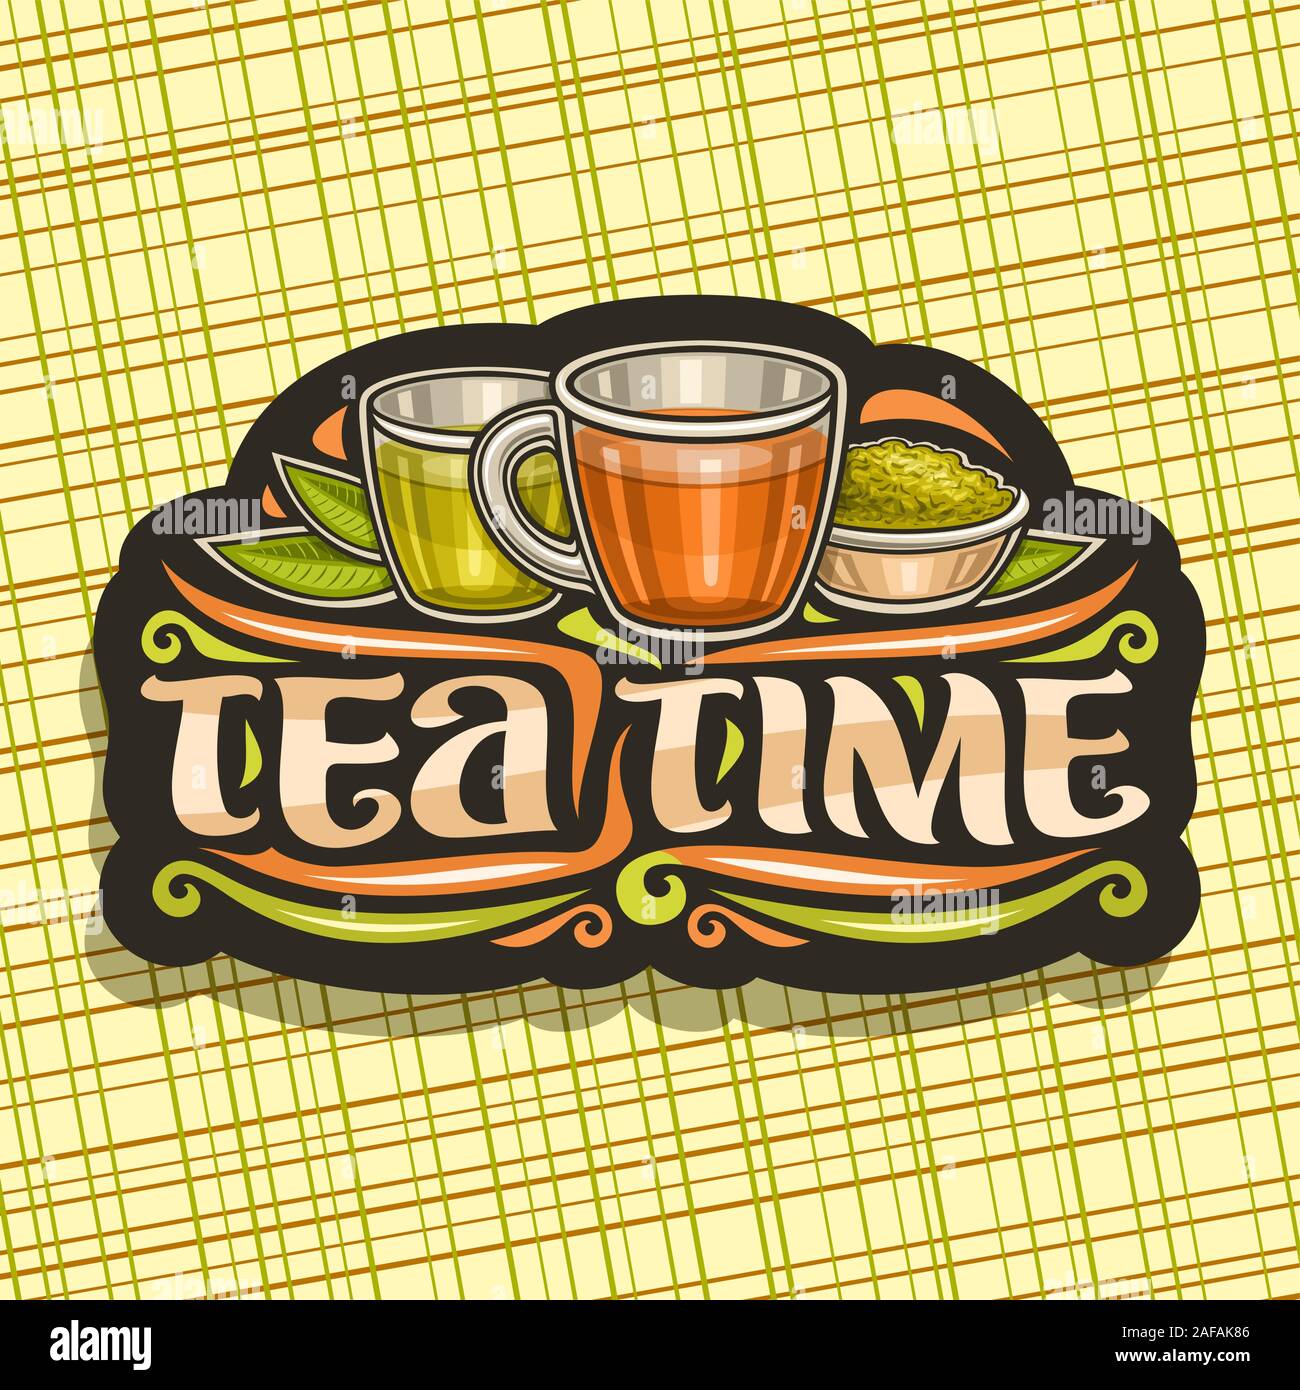 Vector logo for Tea Time, dark vintage sign with illustration of 2 glass cups with yellow and brown liquid, metal bowl with loose tea, decorative type Stock Vector